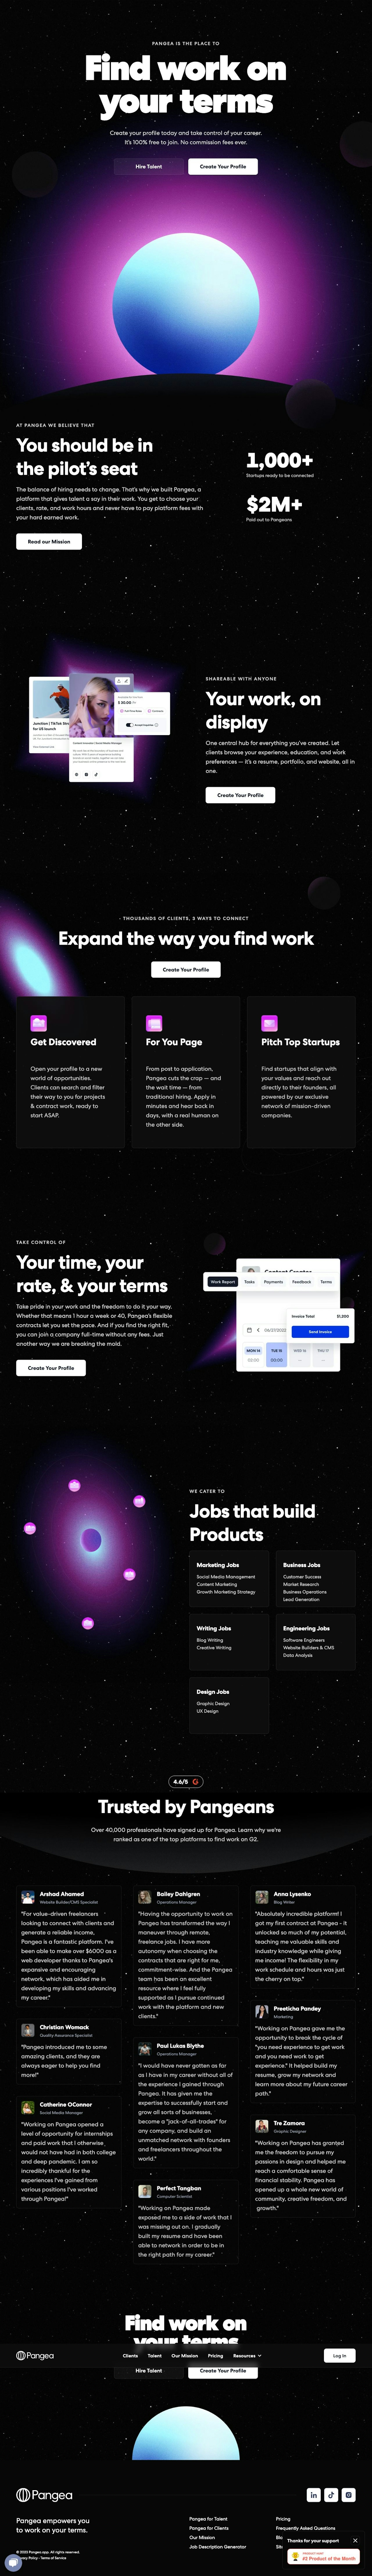 Find Work on Your Terms • Pangea for Talent landing page design